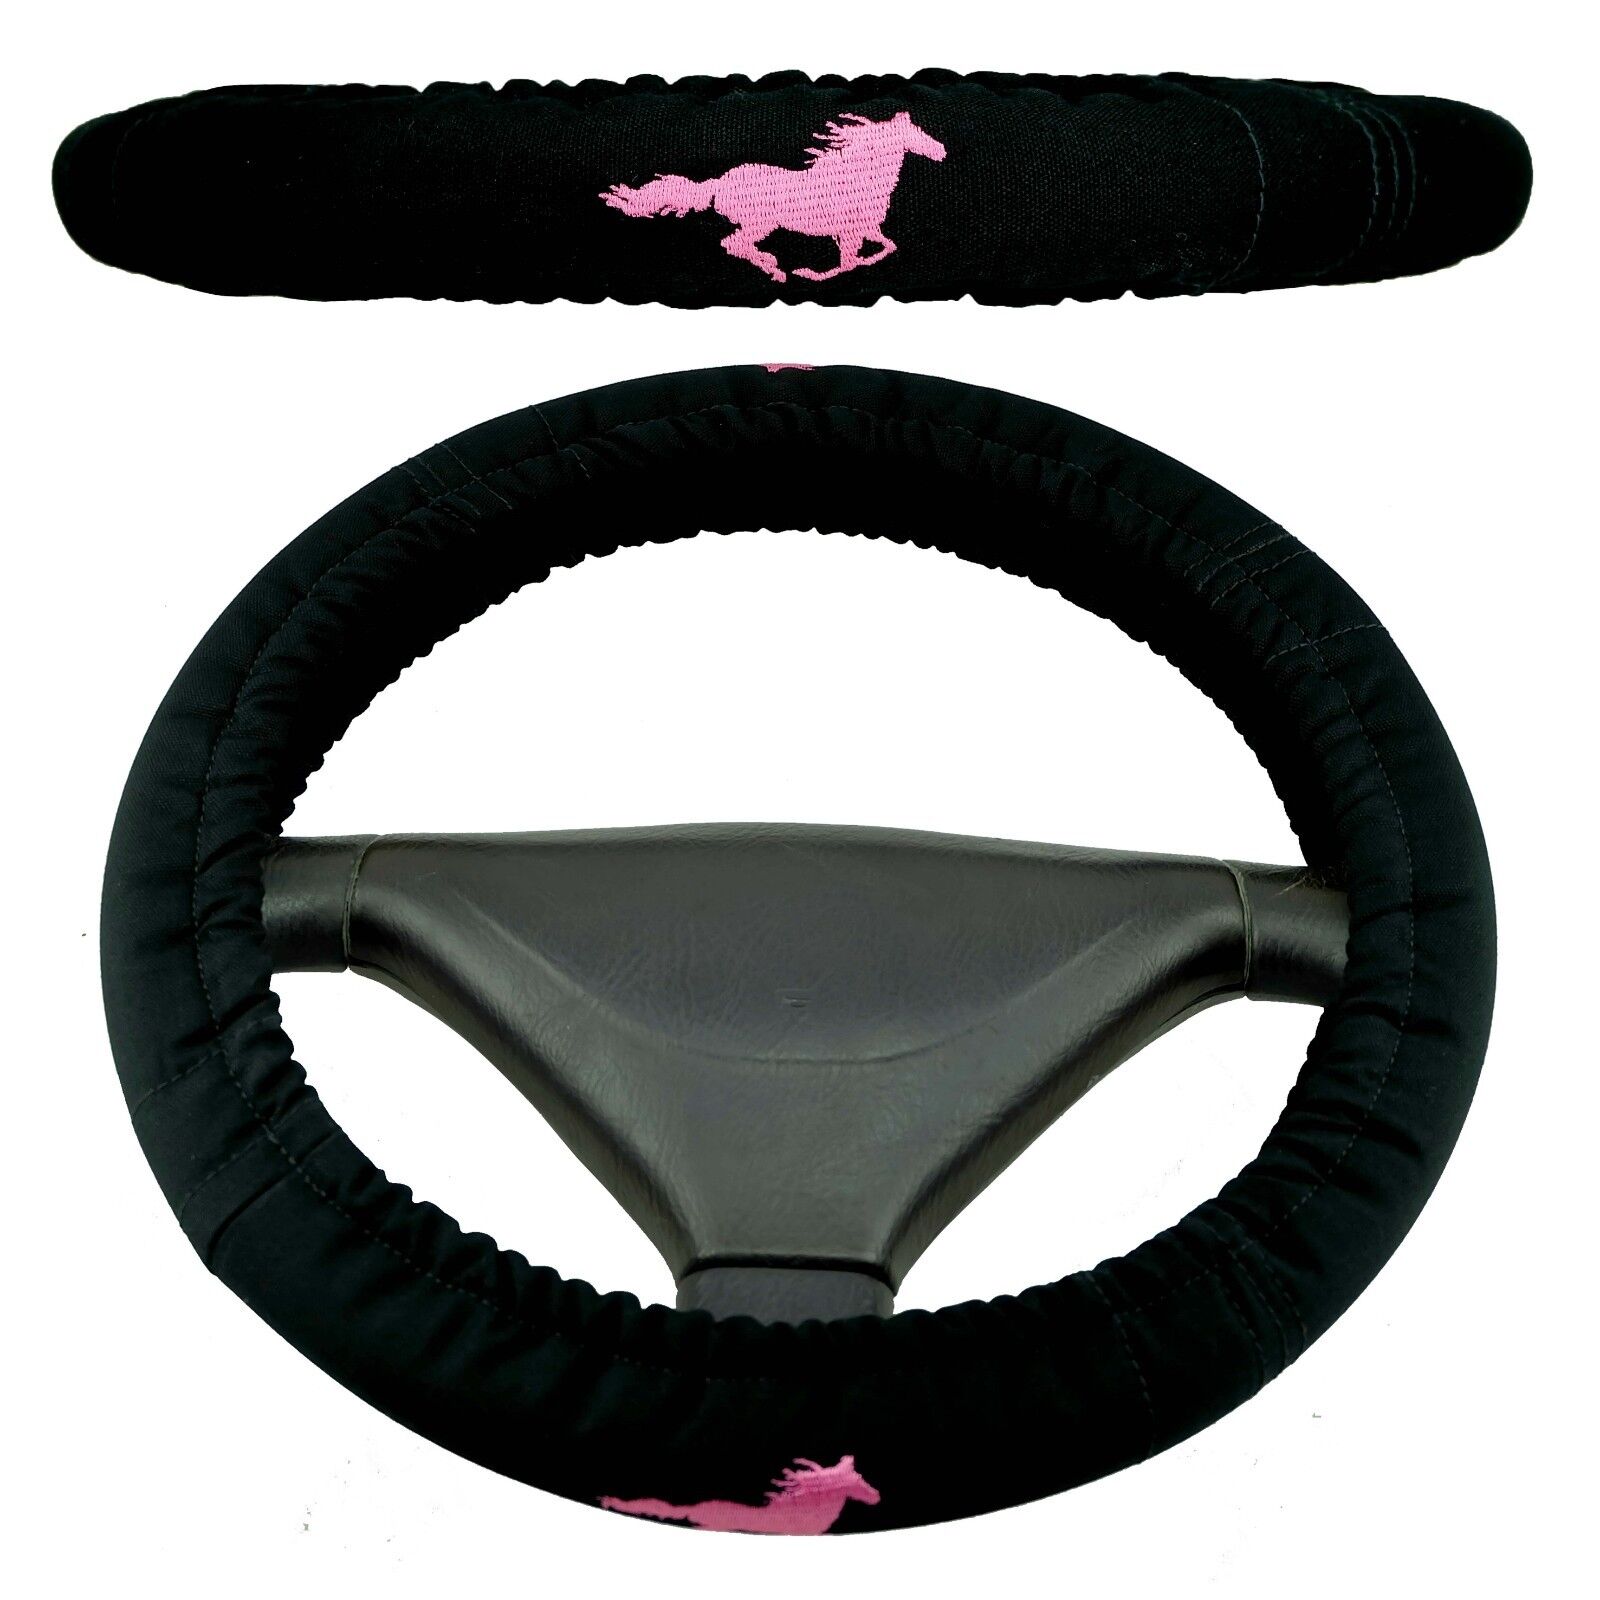 Car Steering Wheel Cover Black with an Embroidered Horse